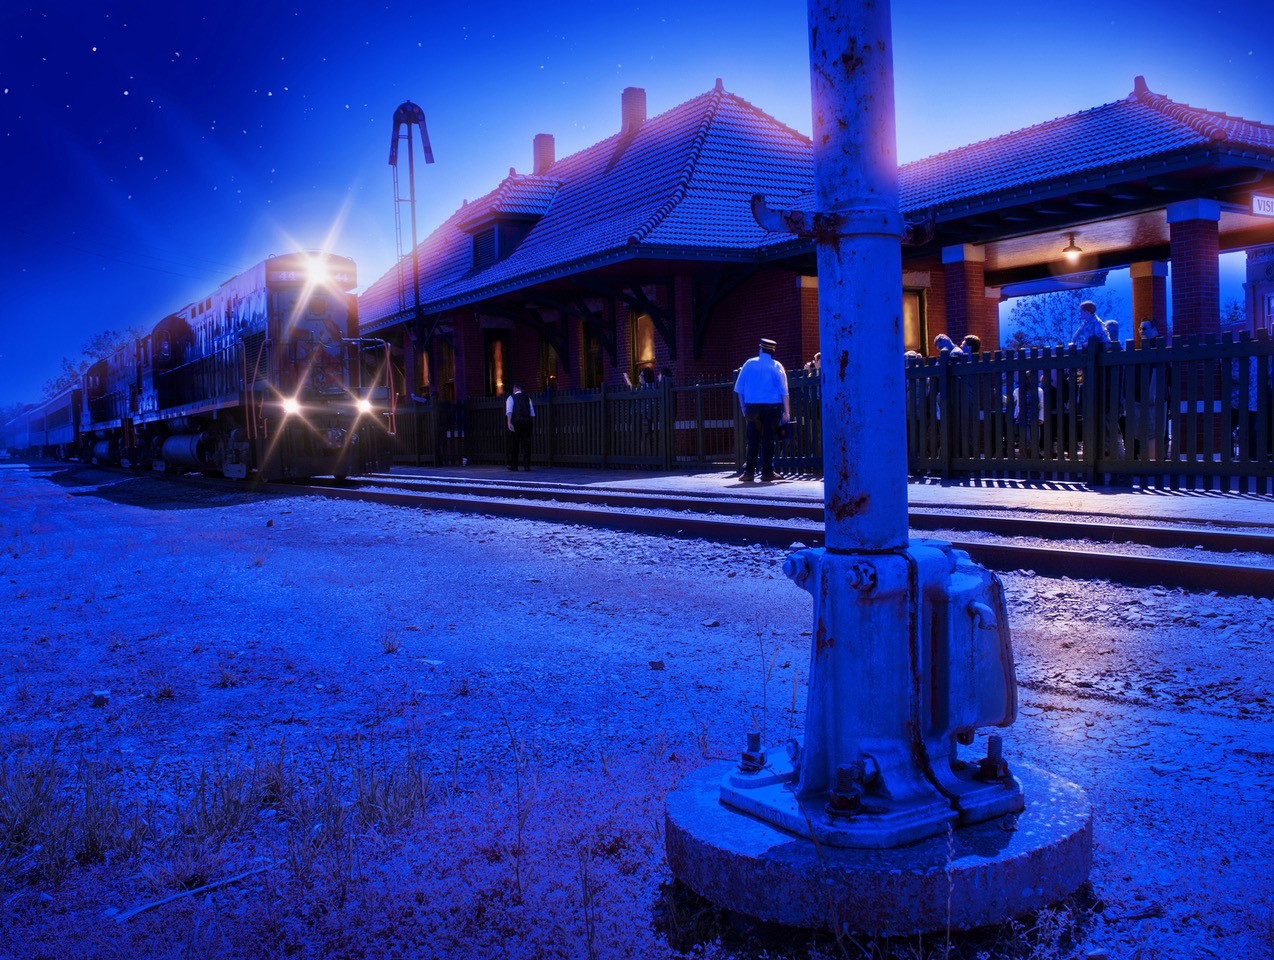 train station in snow